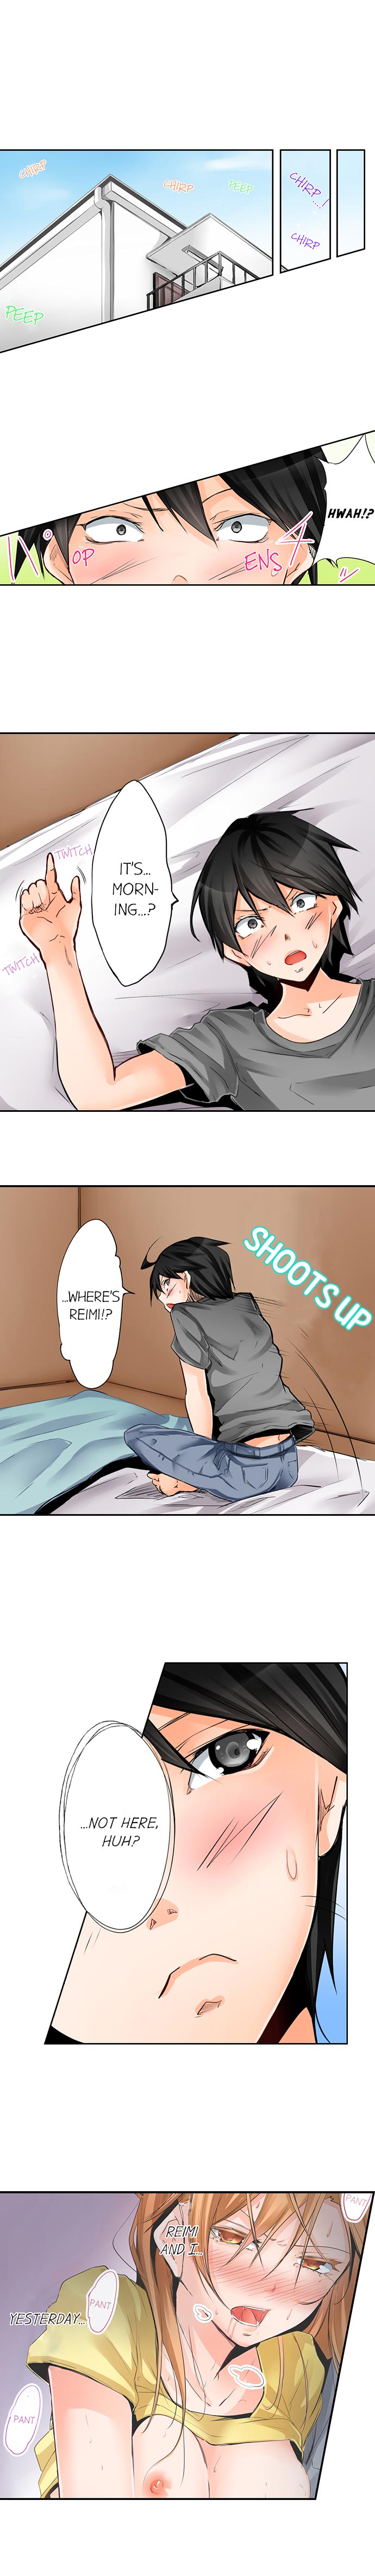 The Secret 3P Sleepover in a 7 Square Meter Room - Chapter 4 Page 4